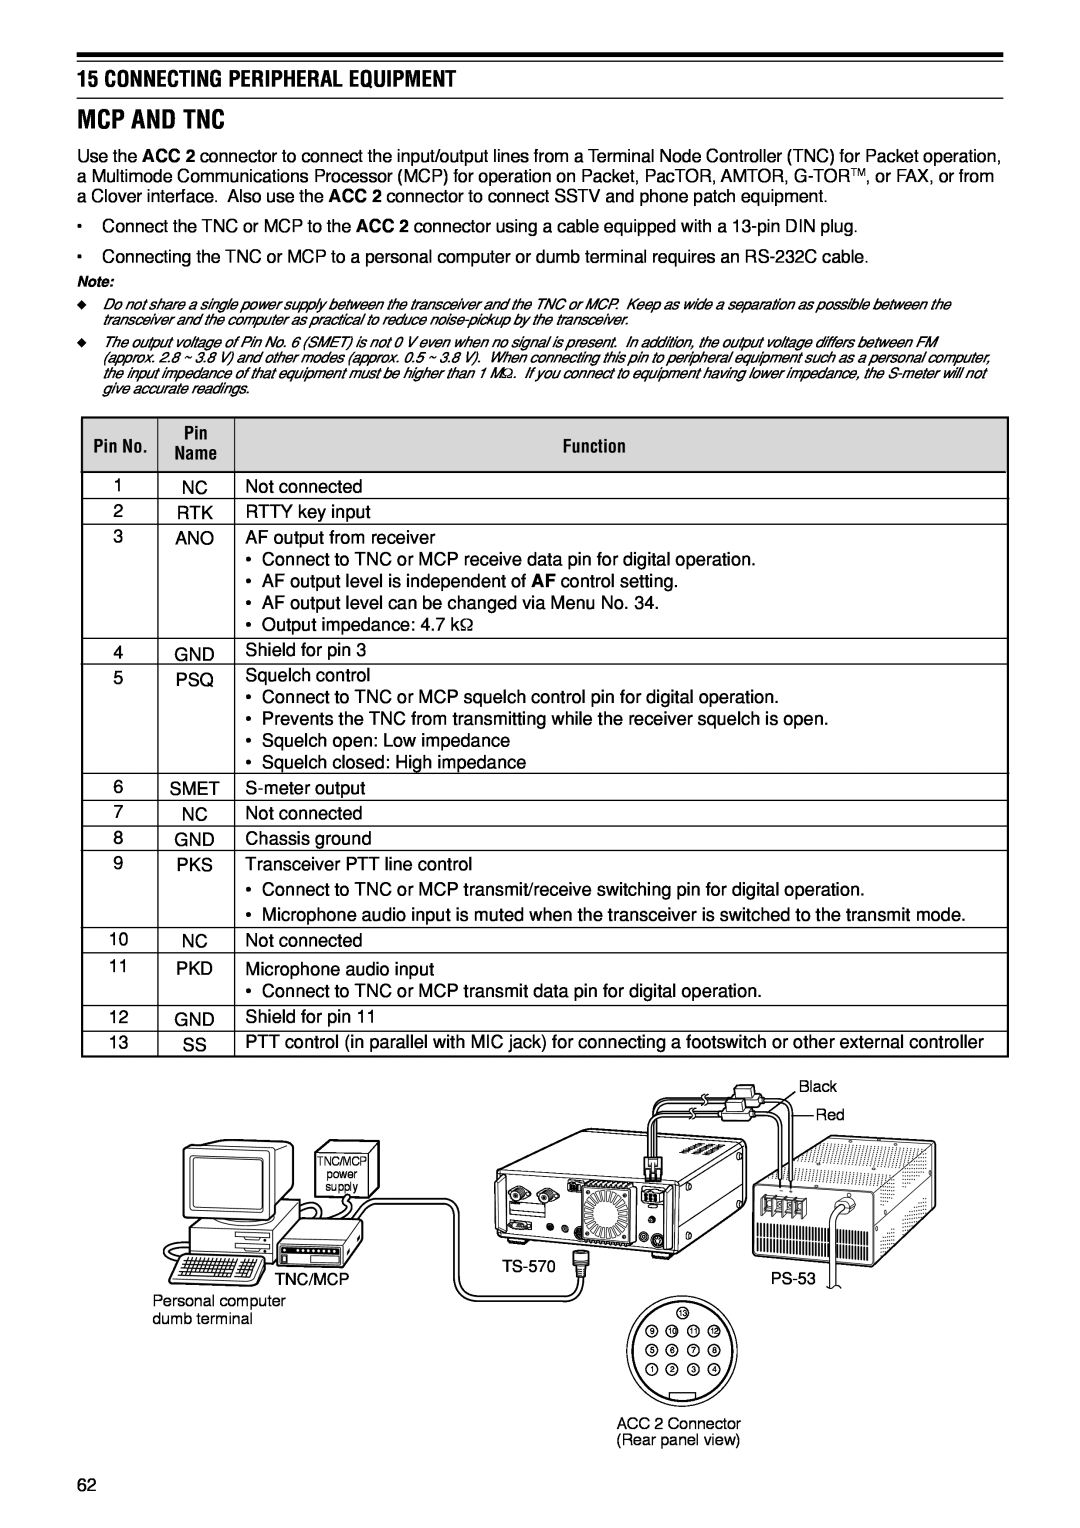 Kenwood TS-570D instruction manual Mcp And Tnc, Connecting Peripheral Equipment, Pin No, Function 